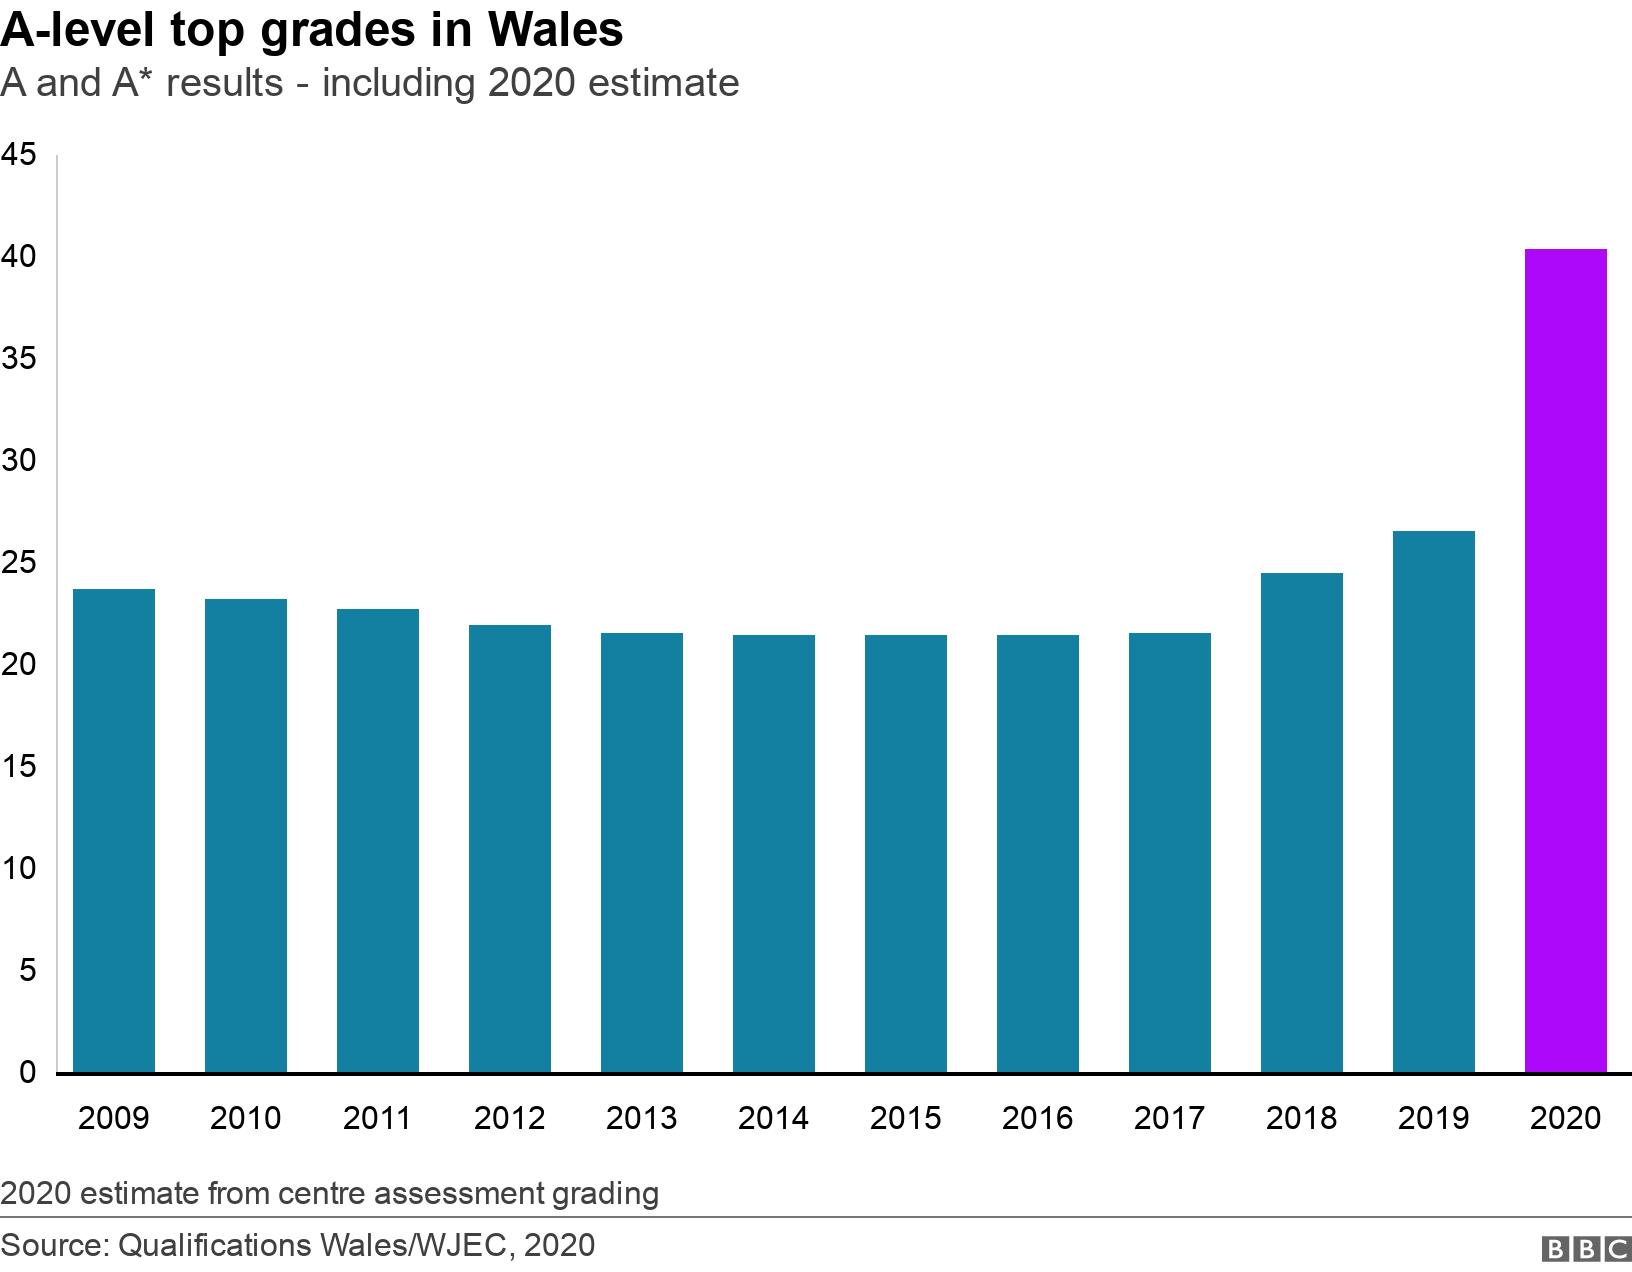 A-level top grades in Wales. A and A* results - including 2020 estimate.  2020 estimate from centre assessment grading.